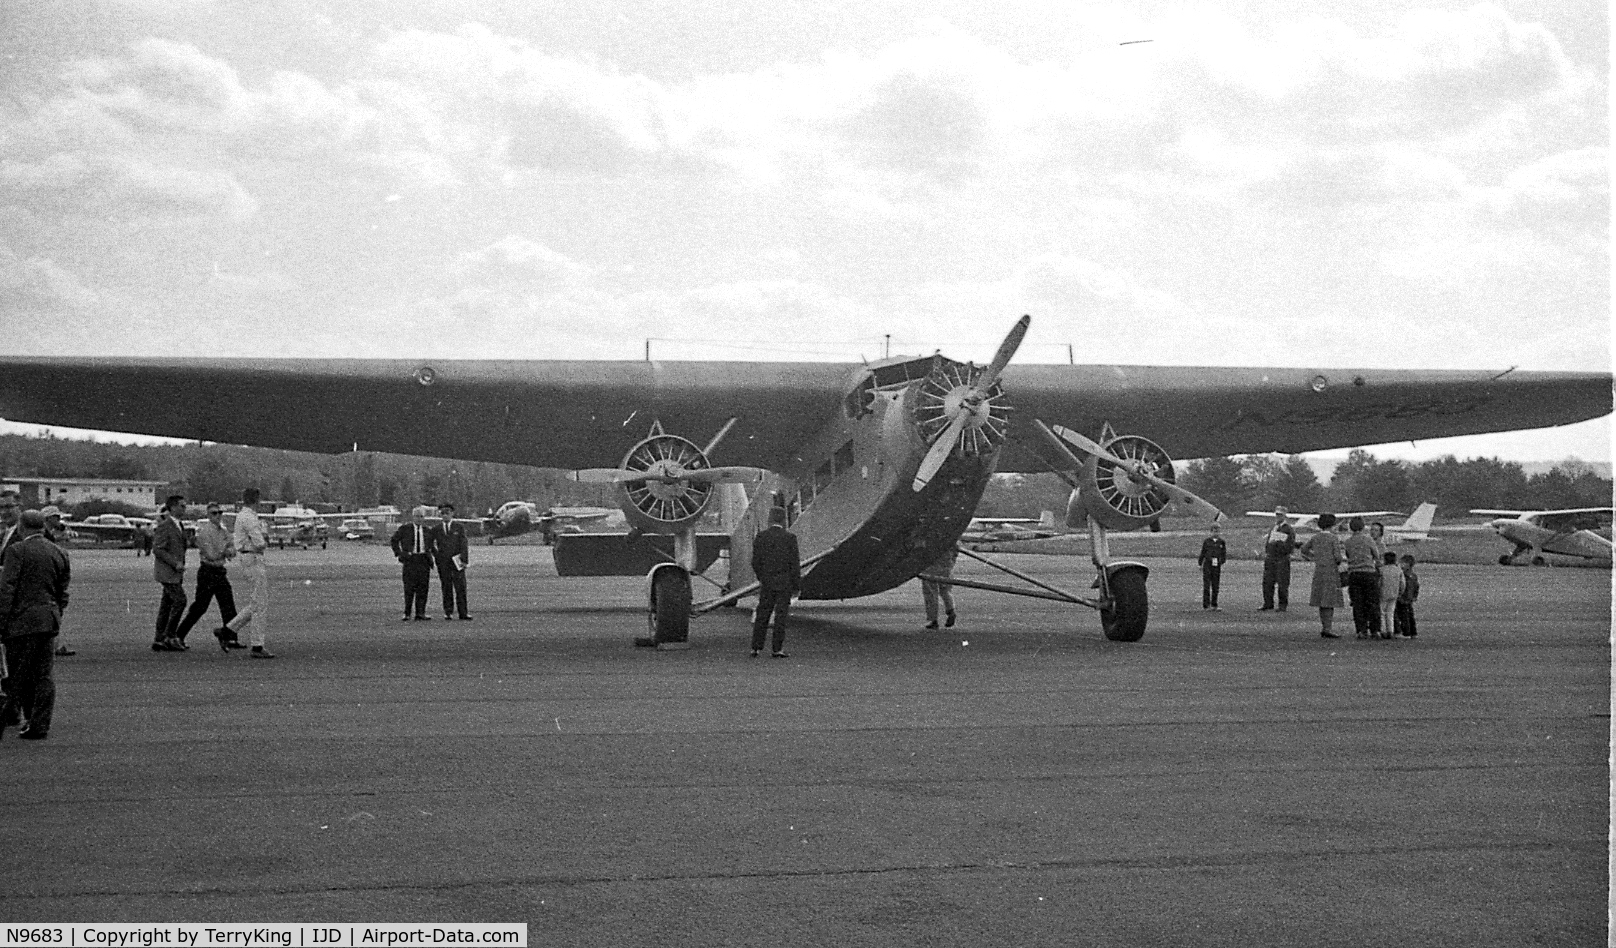 N9683, 1929 Ford 5-AT-B Tri-Motor C/N 39, N9683 on the ground at Windham Airport near Willimantic Connecticut in 1962 as American Airlines did a farewell tour before presenting the aircraft to the Smithsonian, where it remains today. I was credentialed as a broadcast journalist and got to fly!